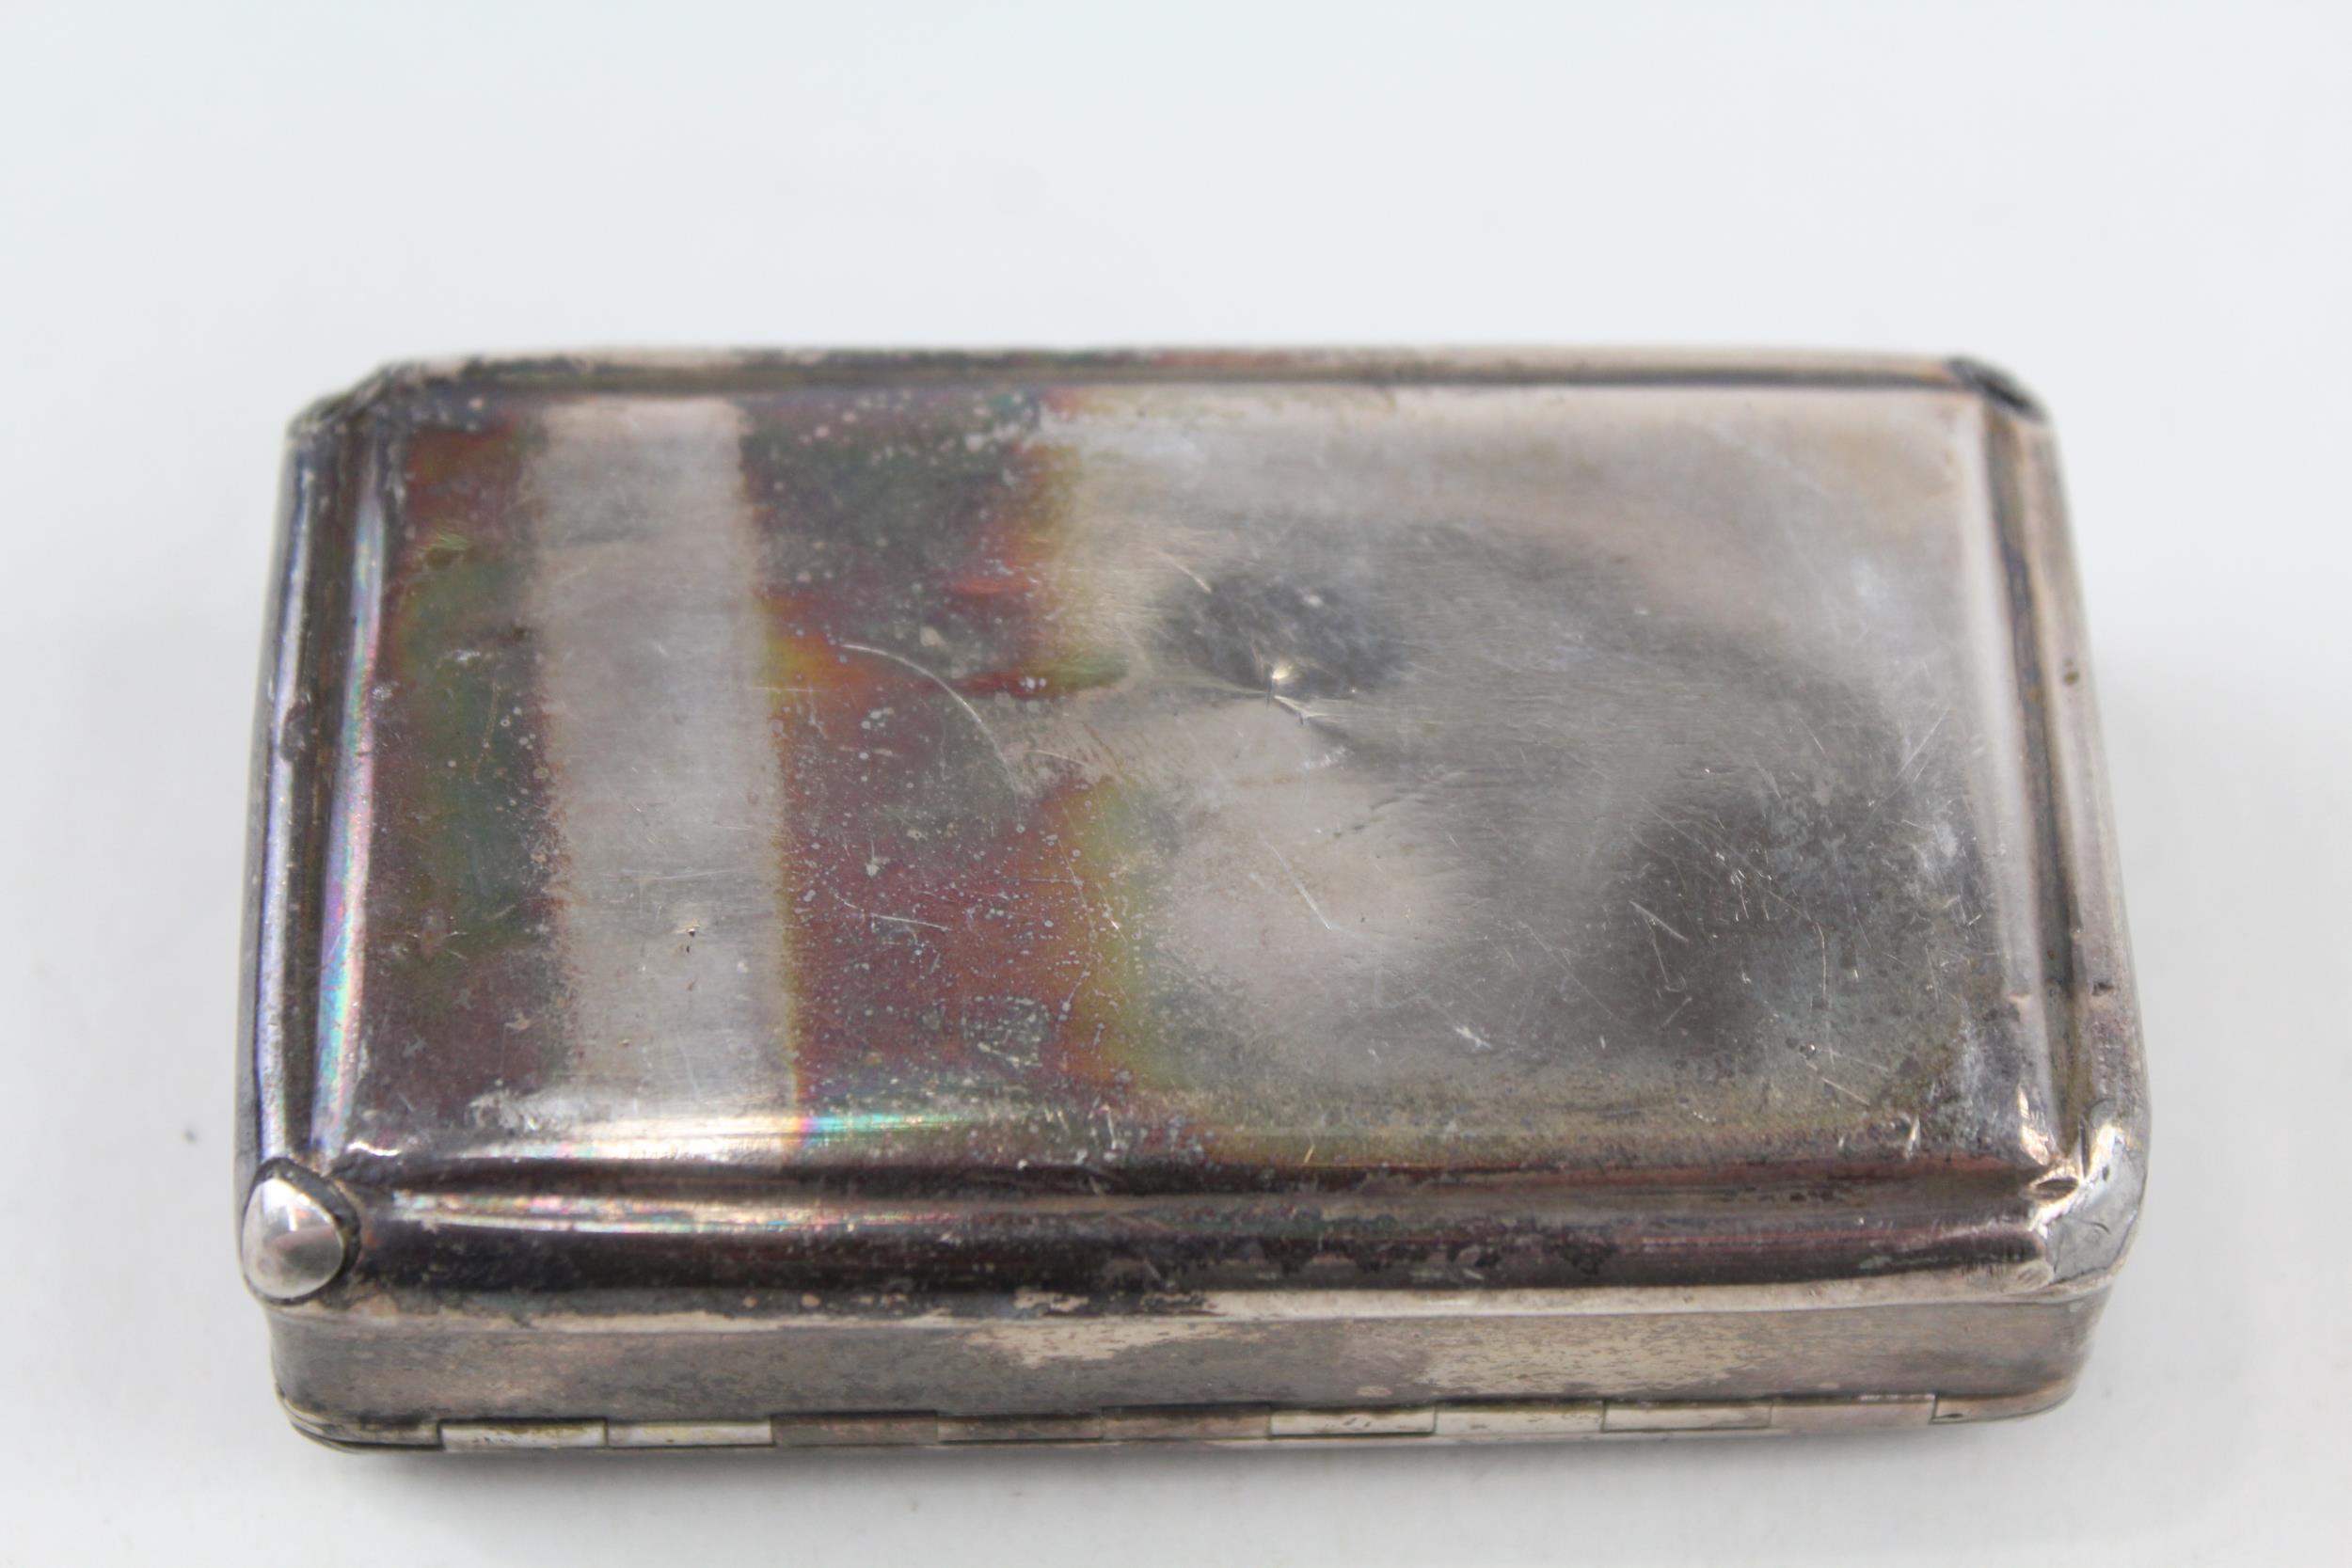 Antique George IV Hallmarked 1823 Birmingham Sterling Silver Snuff Box (64g) - w/ Personal Engraving - Image 5 of 5